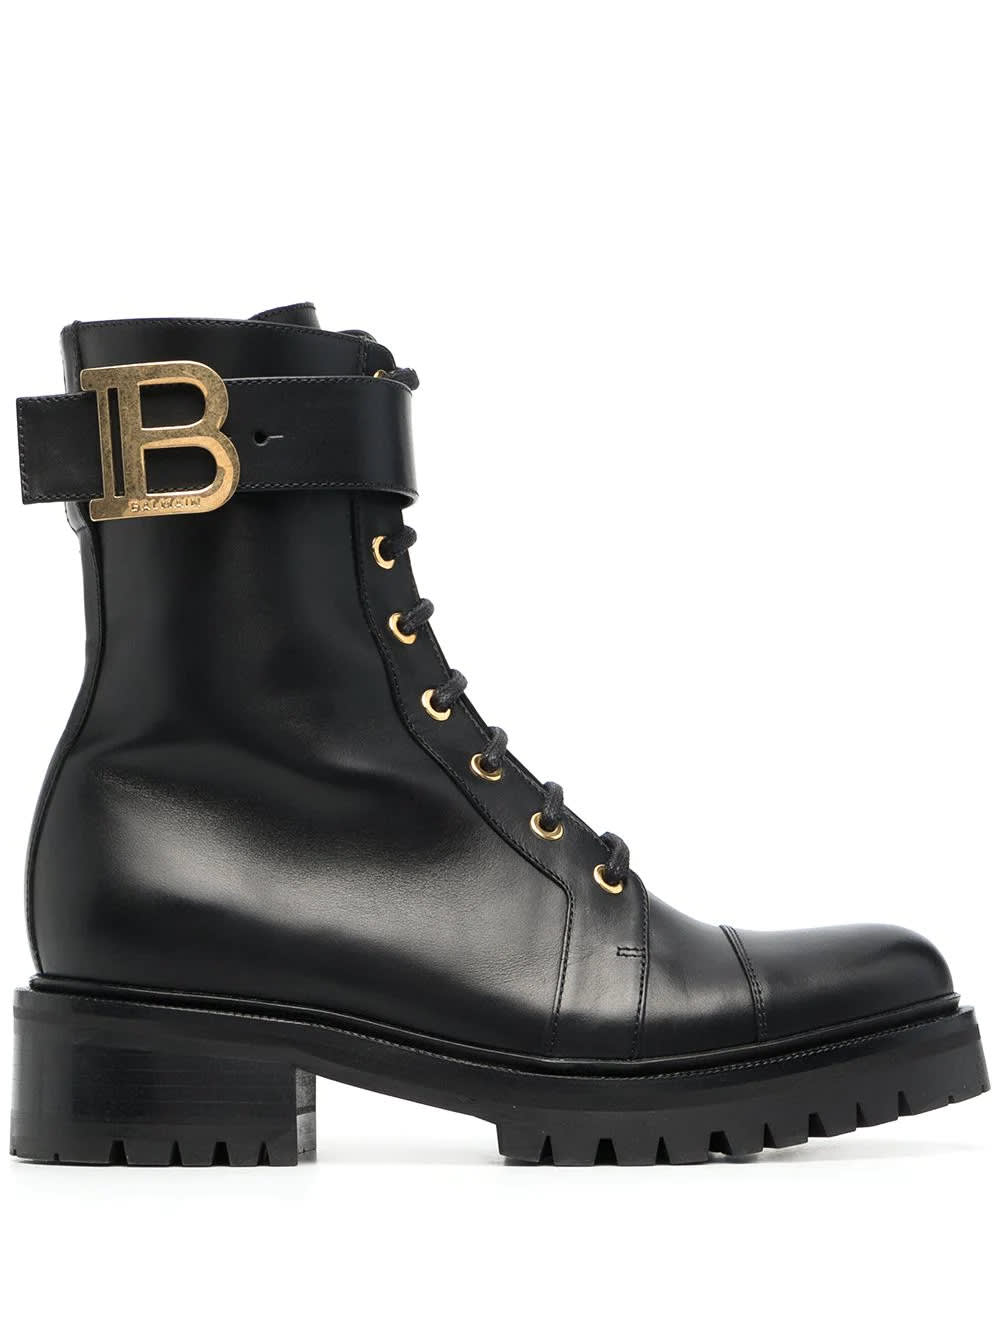 Balmain Woman Ranger Ankle Boot In Black Smooth Leather